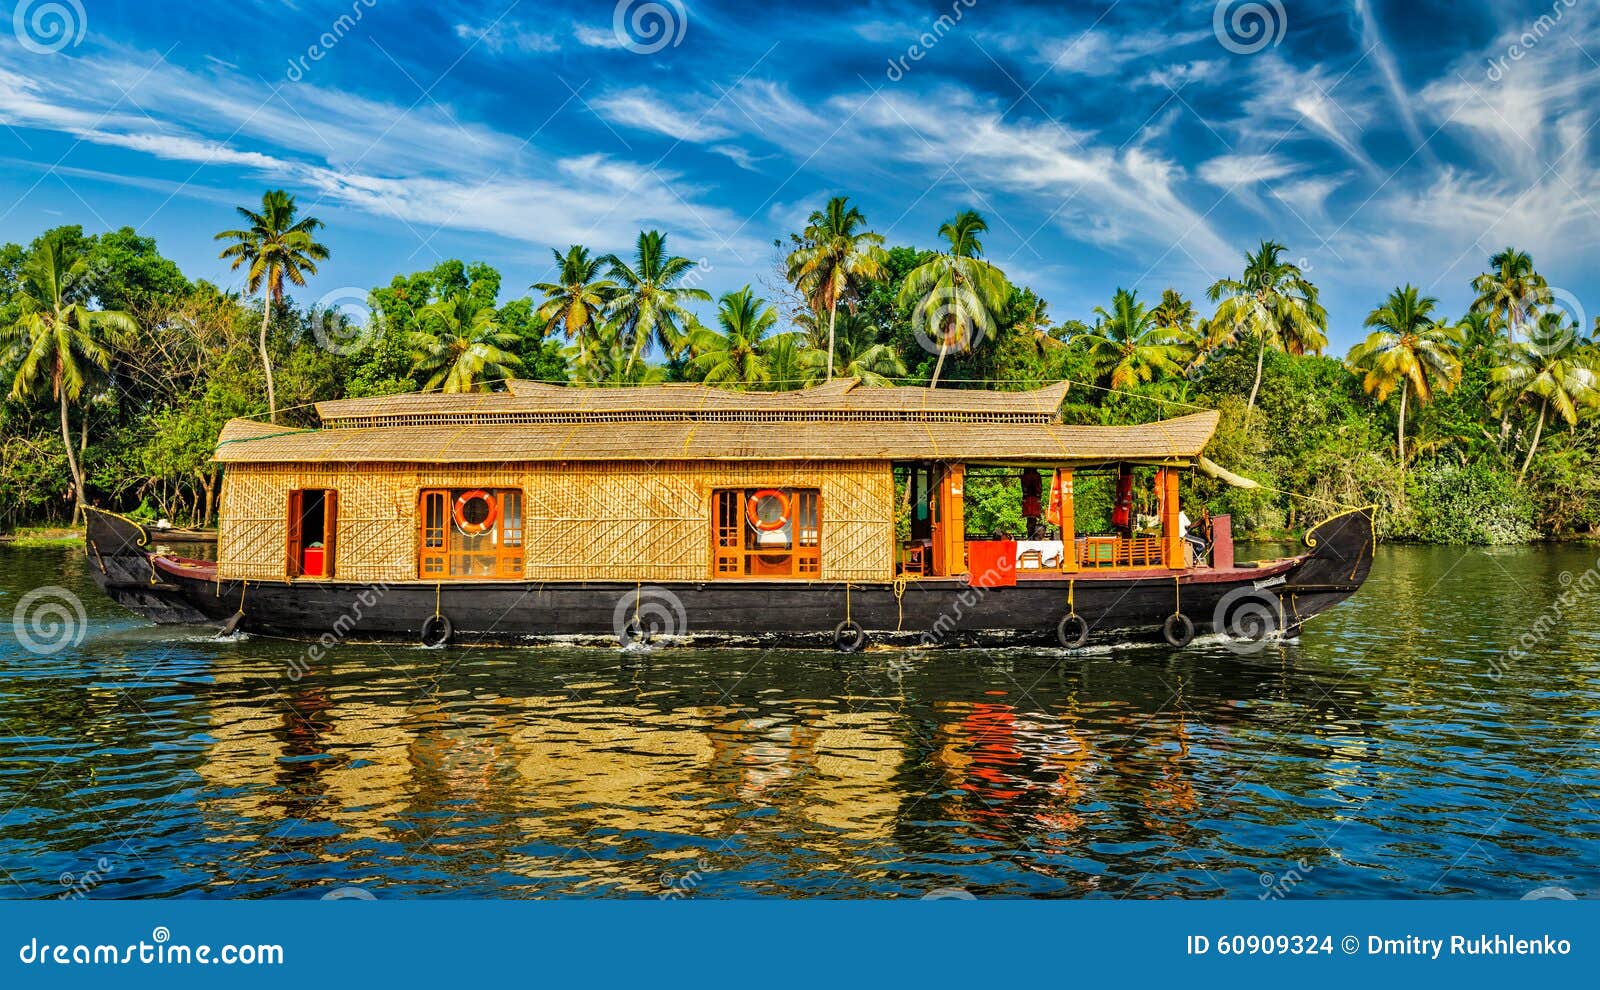 19,977 Kerala Background Stock Photos - Free & Royalty-Free Stock Photos  from Dreamstime